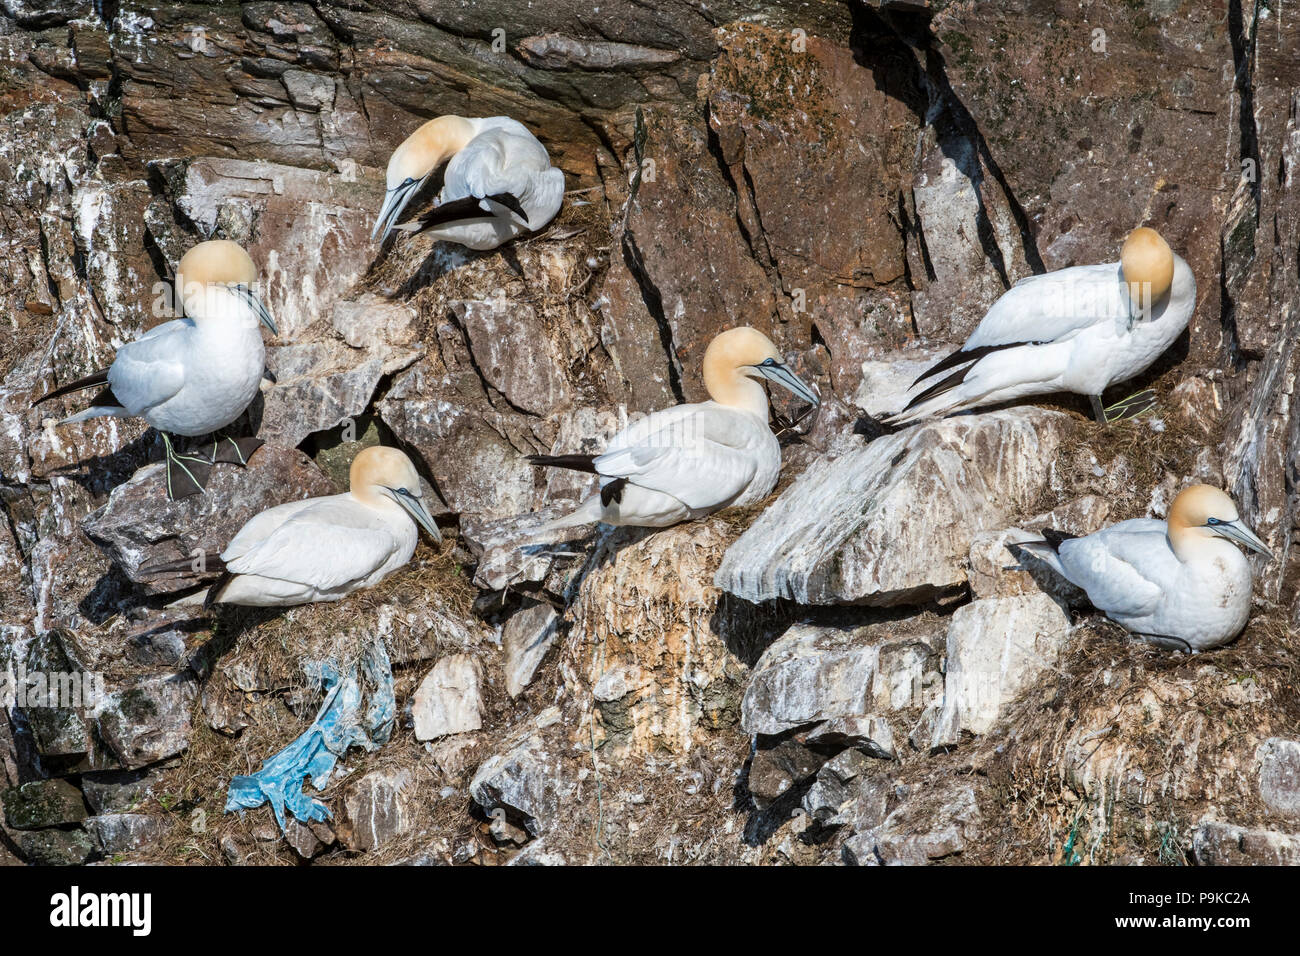 Northern gannets (Morus bassanus) breeding on nests partly made of discarded plastic waste in sea cliff at seabird colony in spring Stock Photo